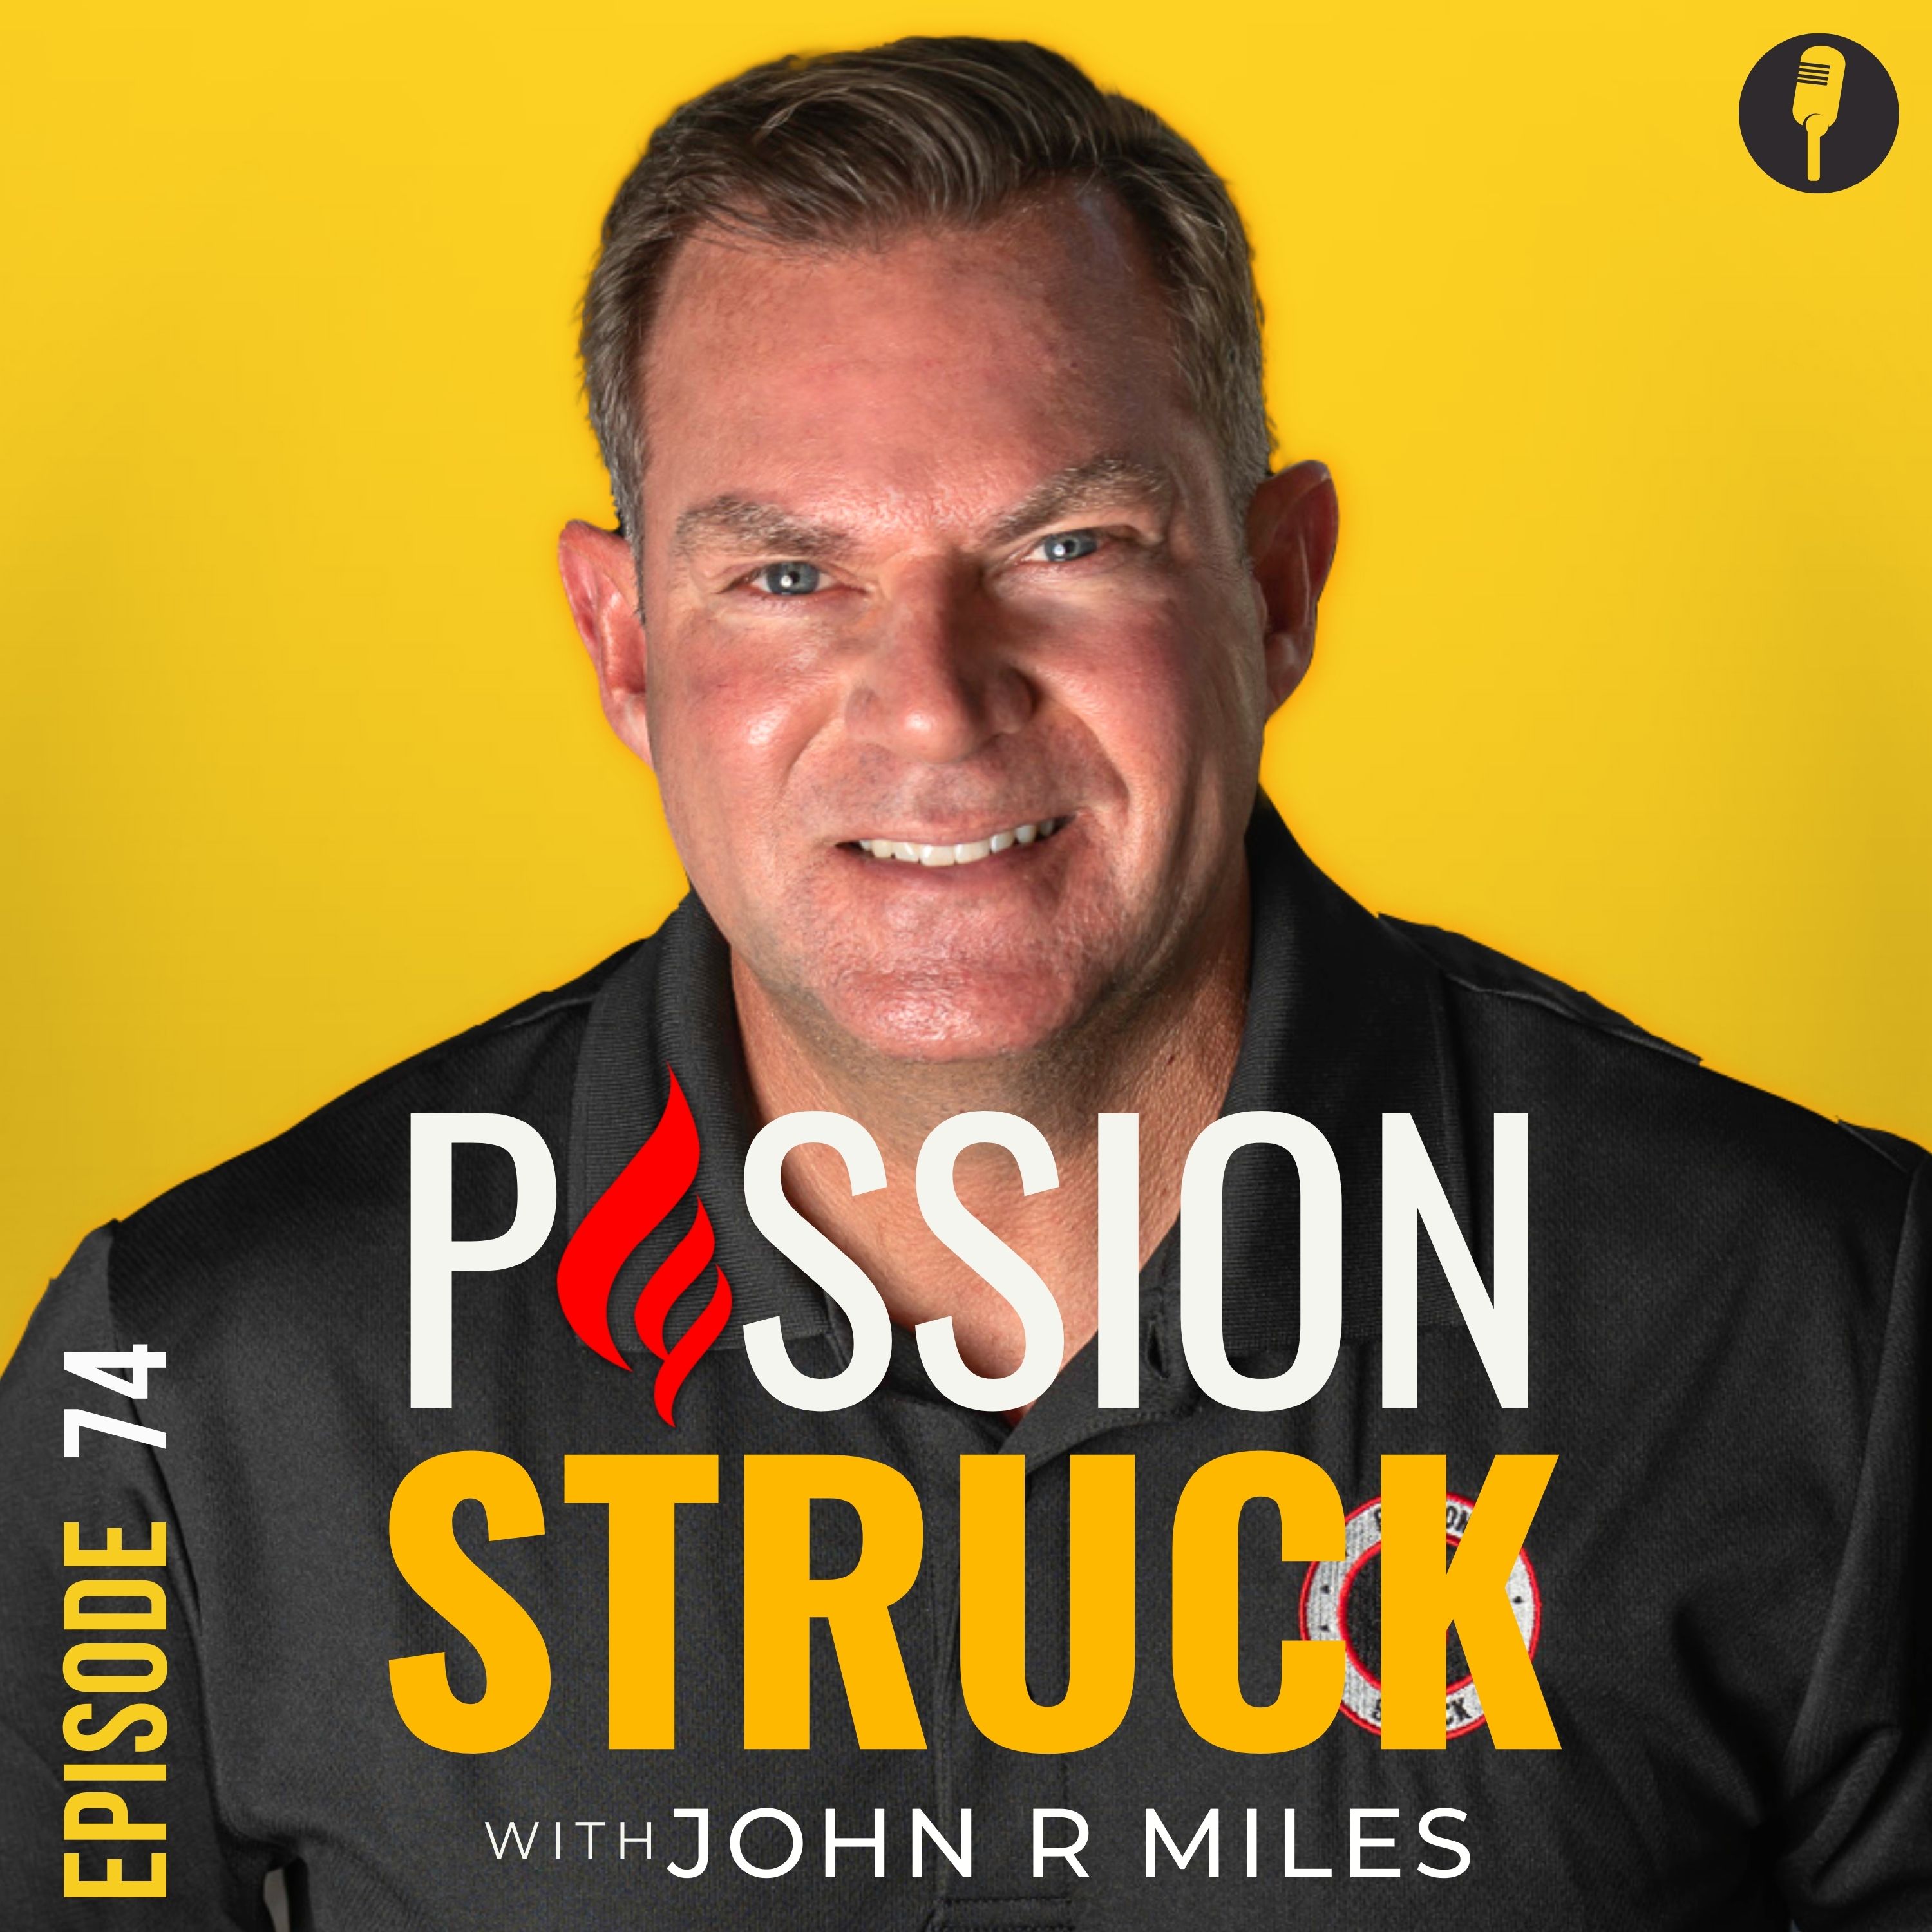 Episode 74 album cover for the passion struck podcast with John R Miles